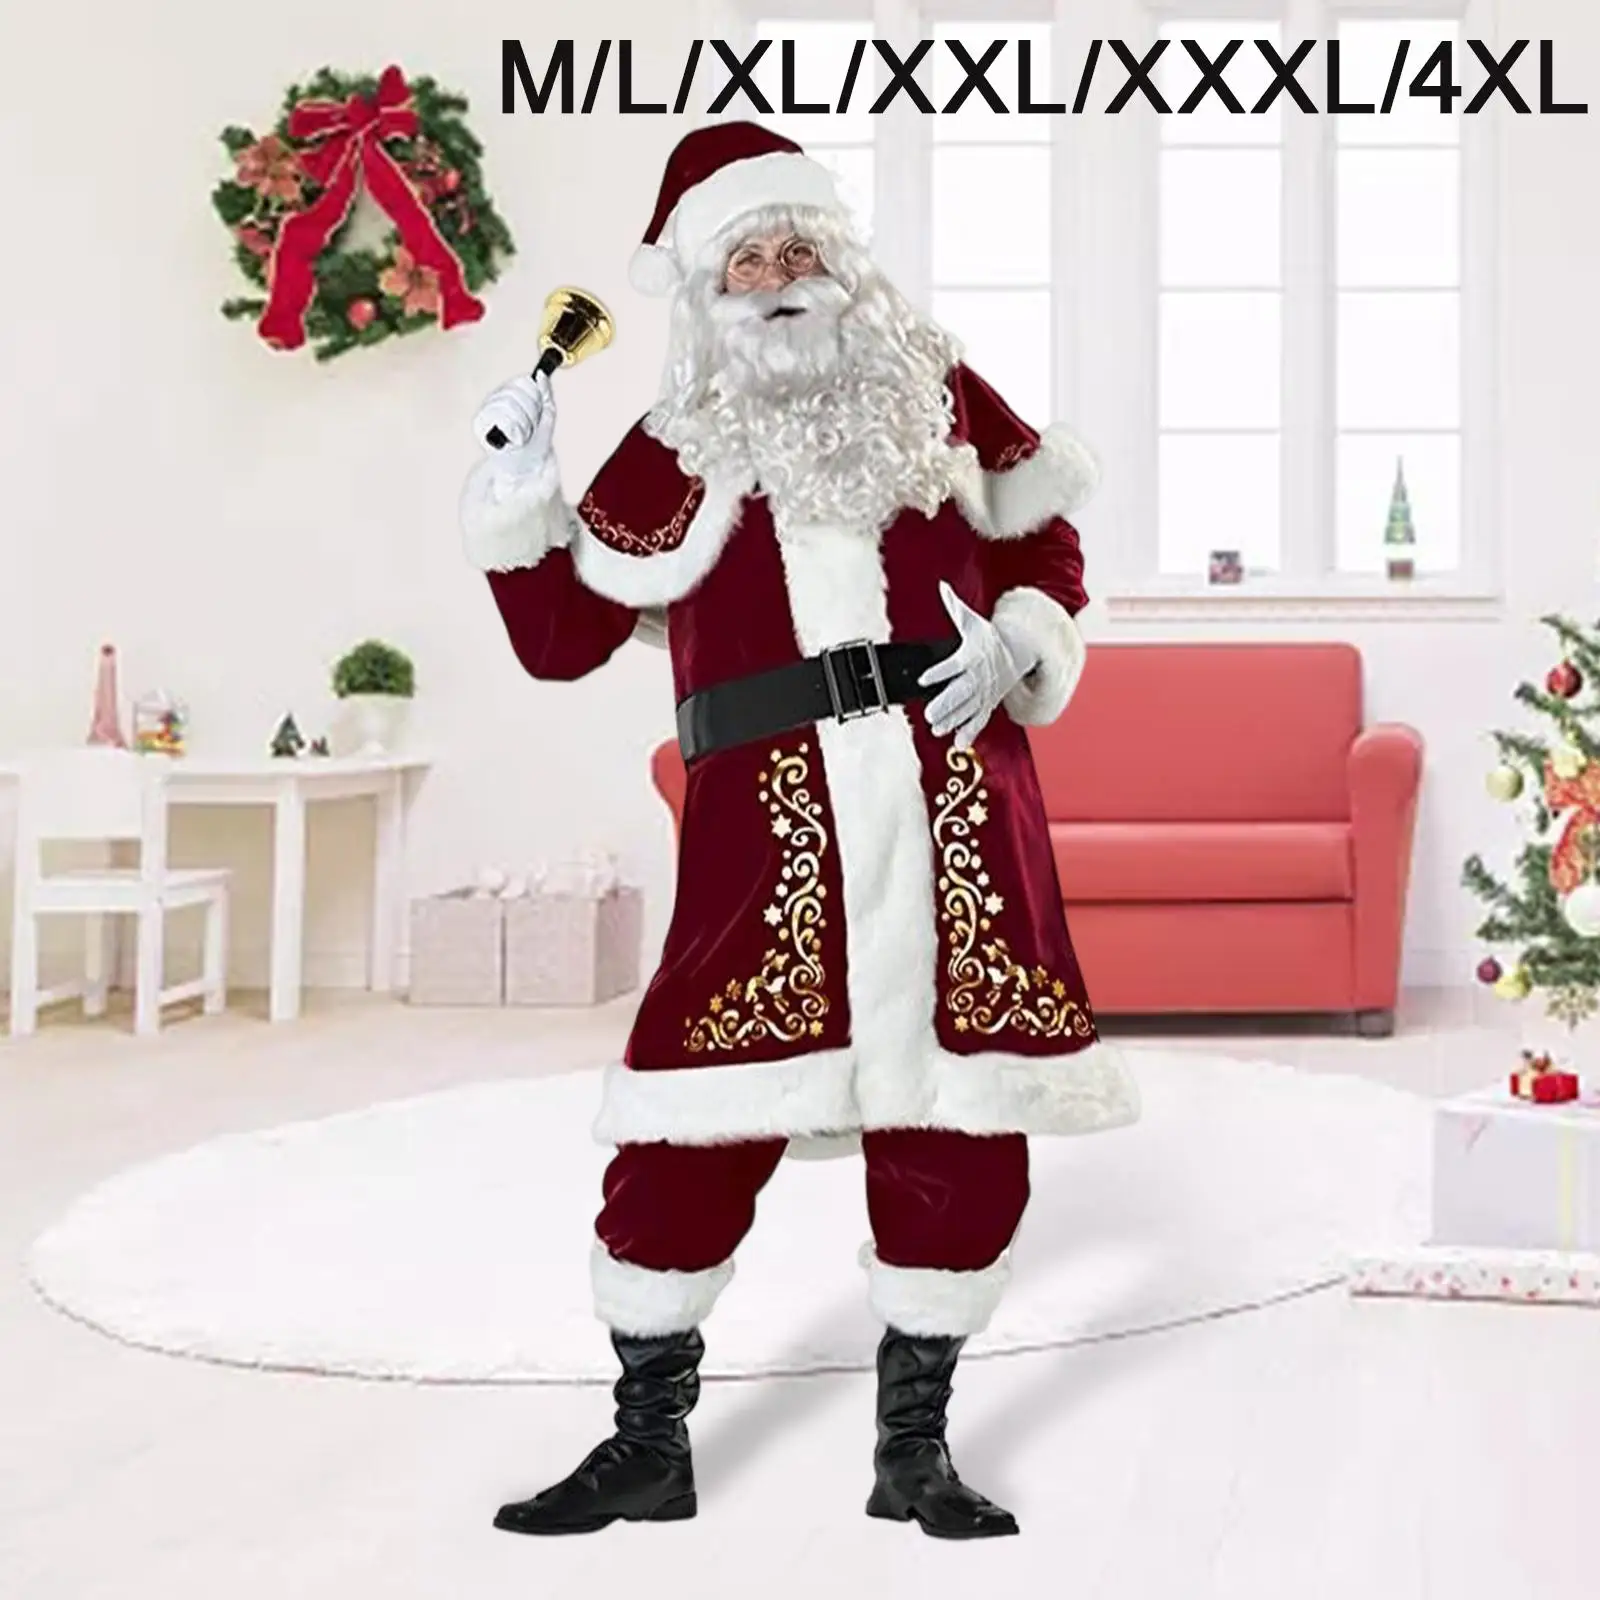 Men Adult Santa Claus Costume Comfortable Cosplay Outfit Reusables Christmas Role for Reunion Clothing Accessory Holidays